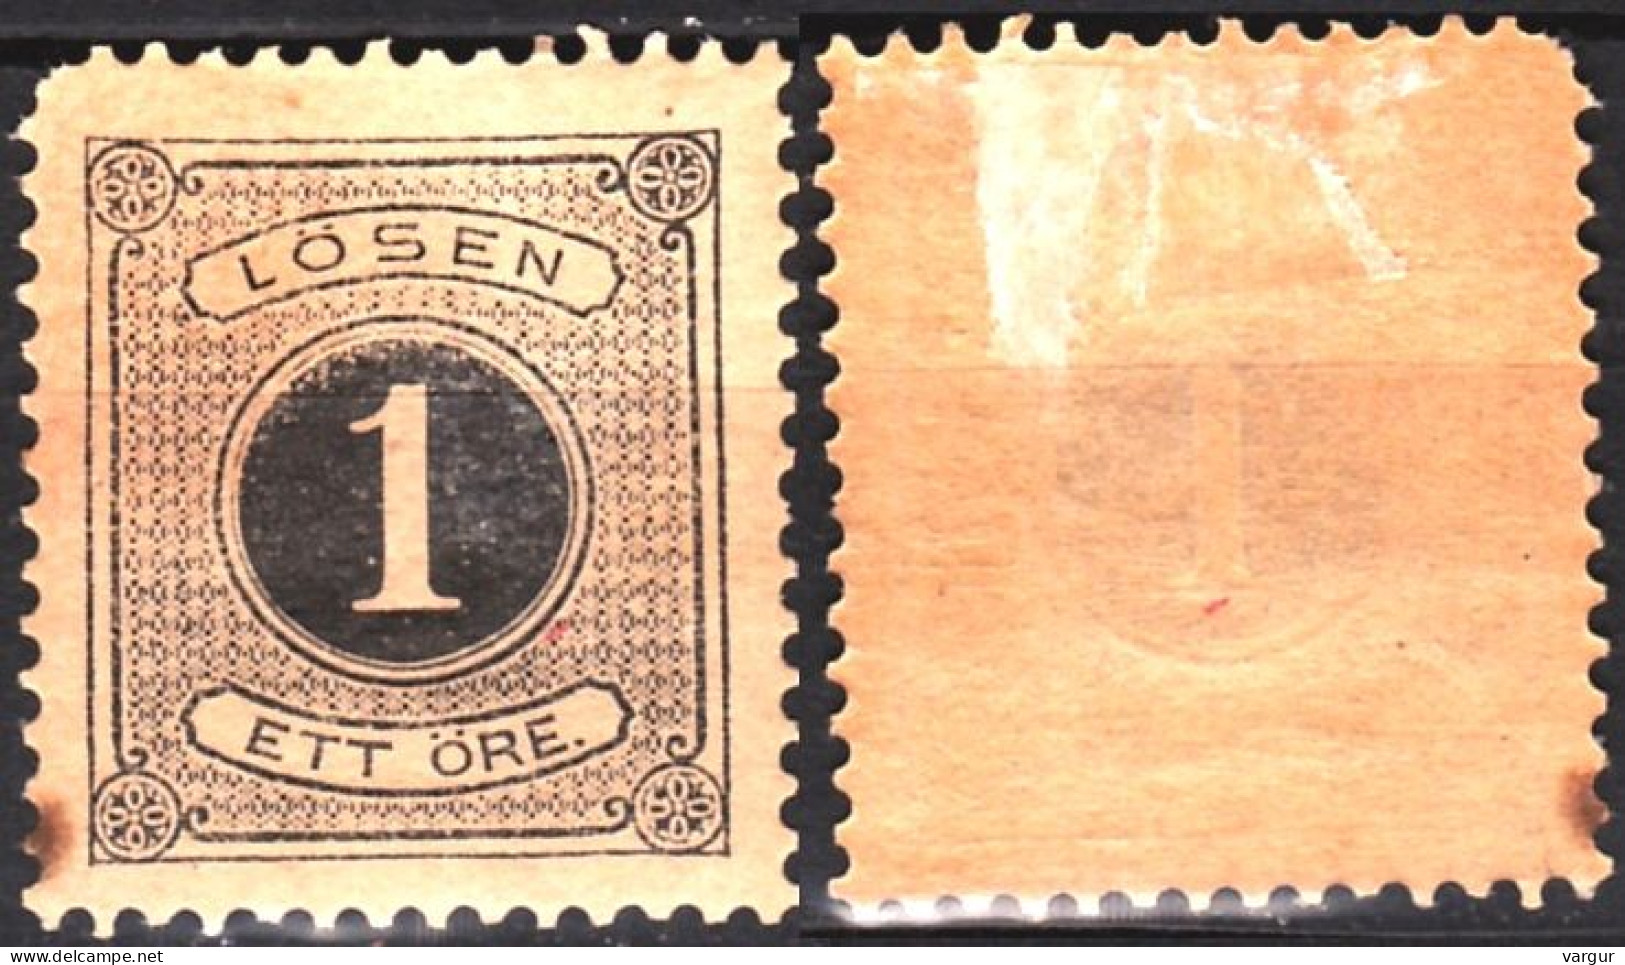 SWEDEN Postage Due 1877 Figure In Circle. 1o Black. Perf 13, MH Lot #1 - Segnatasse